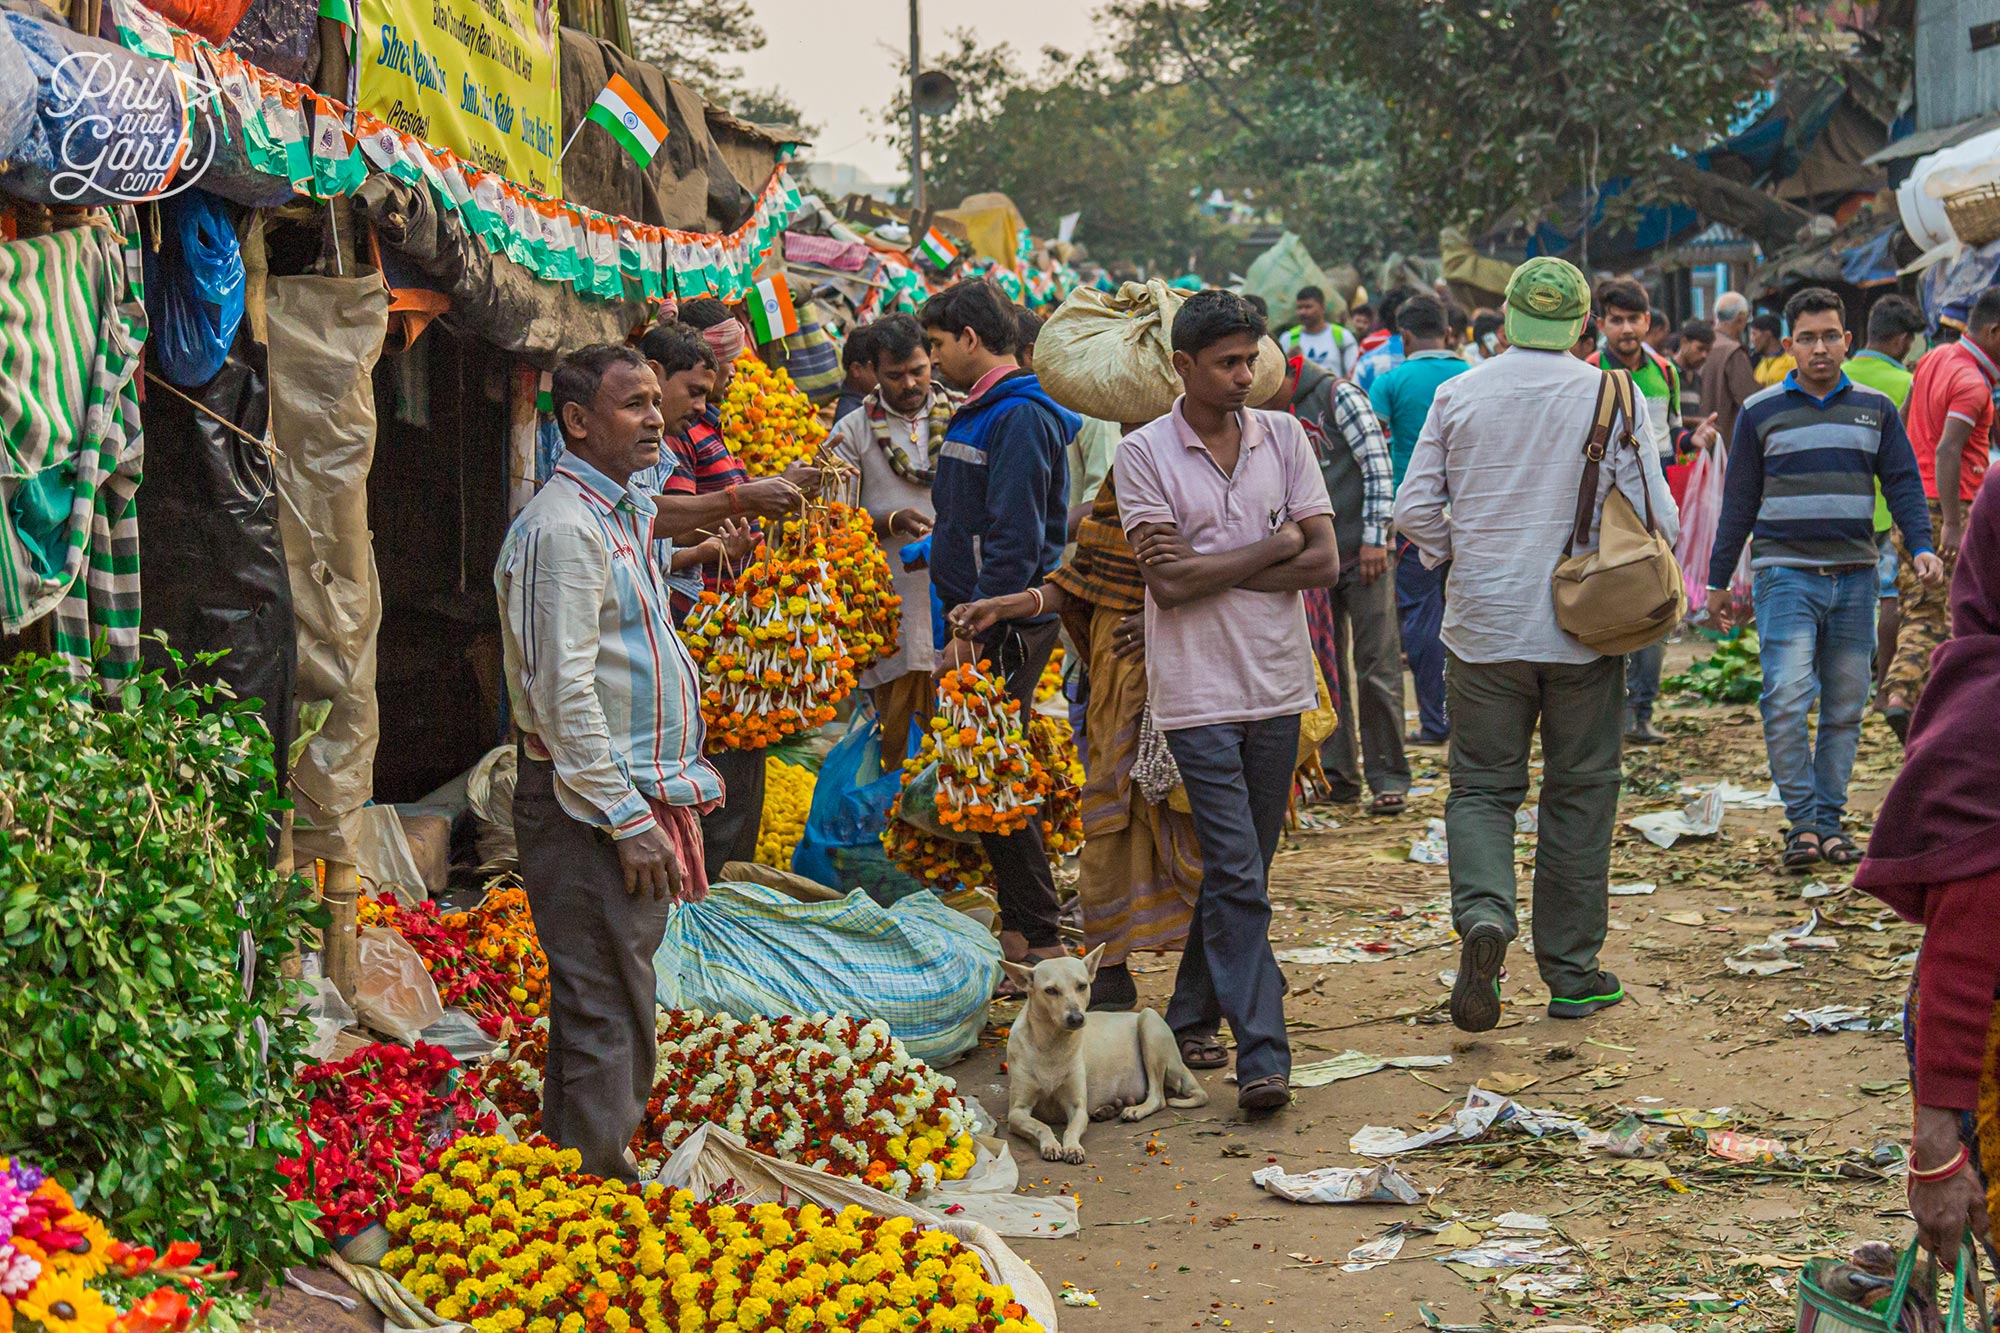 We thought the Mullik Ghat Flower Market is an amazing place to walk through. However it could be an overwhelming place for some.